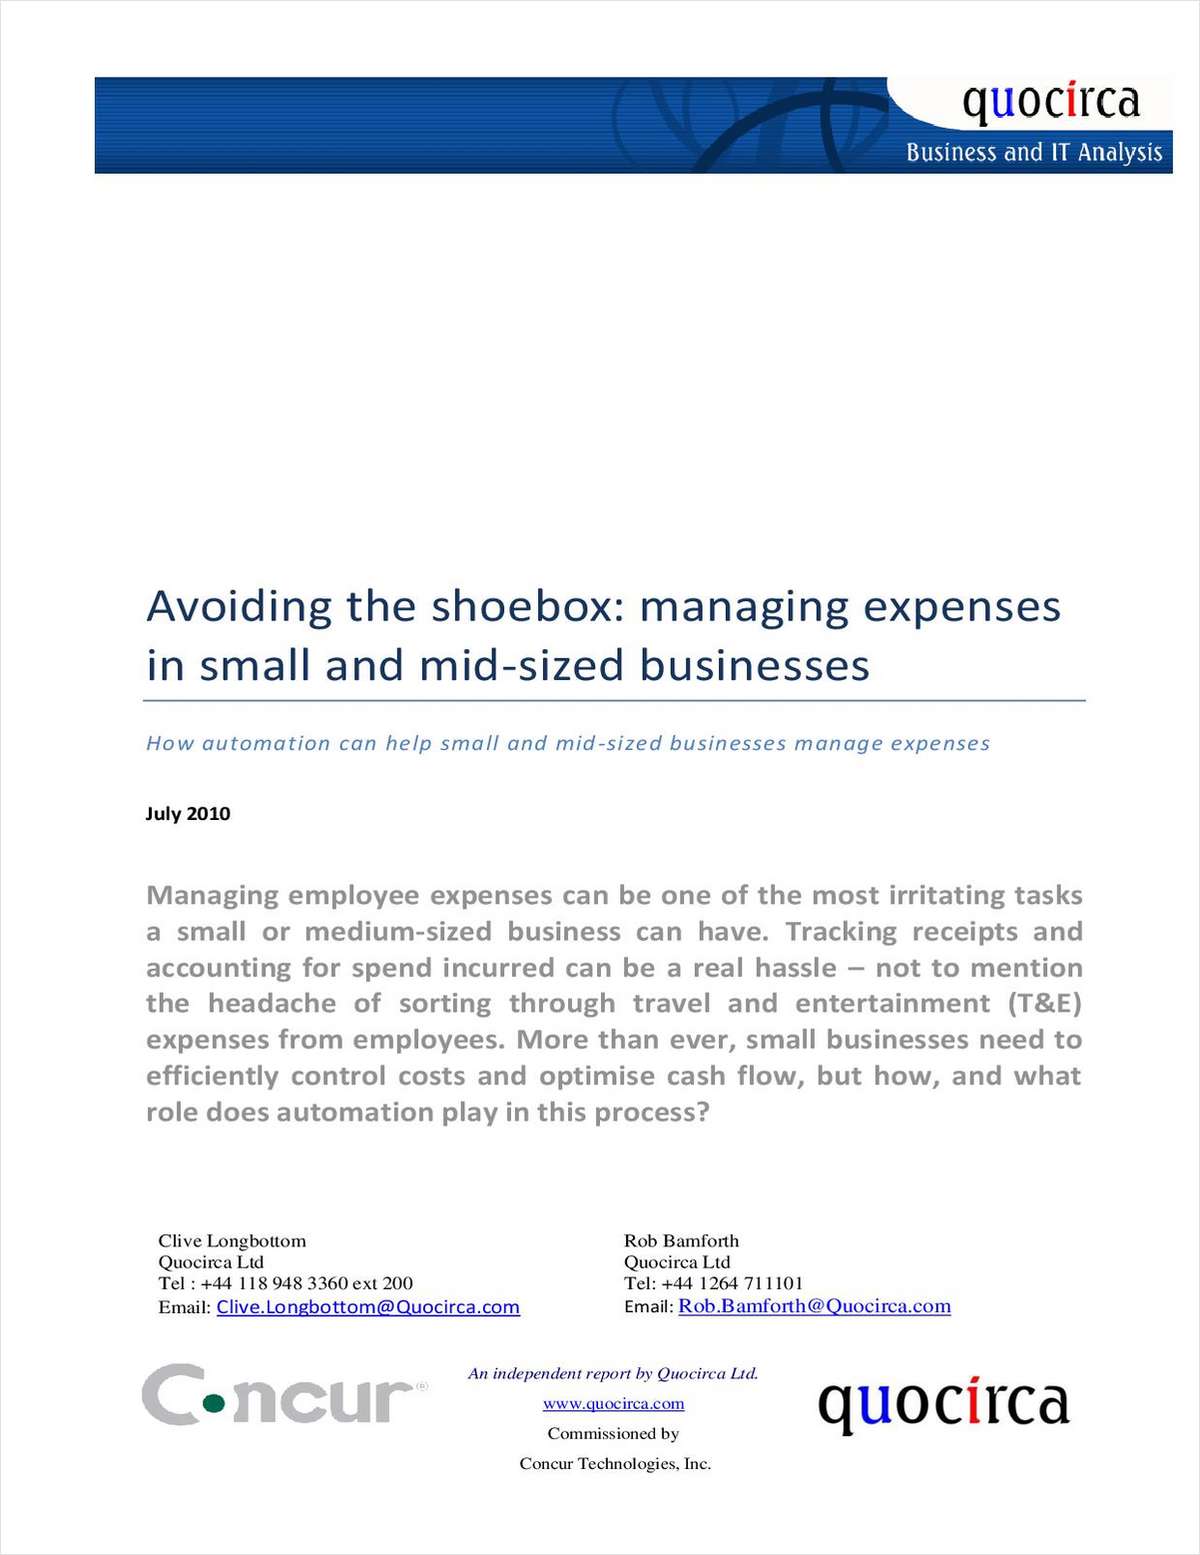 Avoiding the Shoebox: Managing Expenses in Small and Mid-Sized Businesses